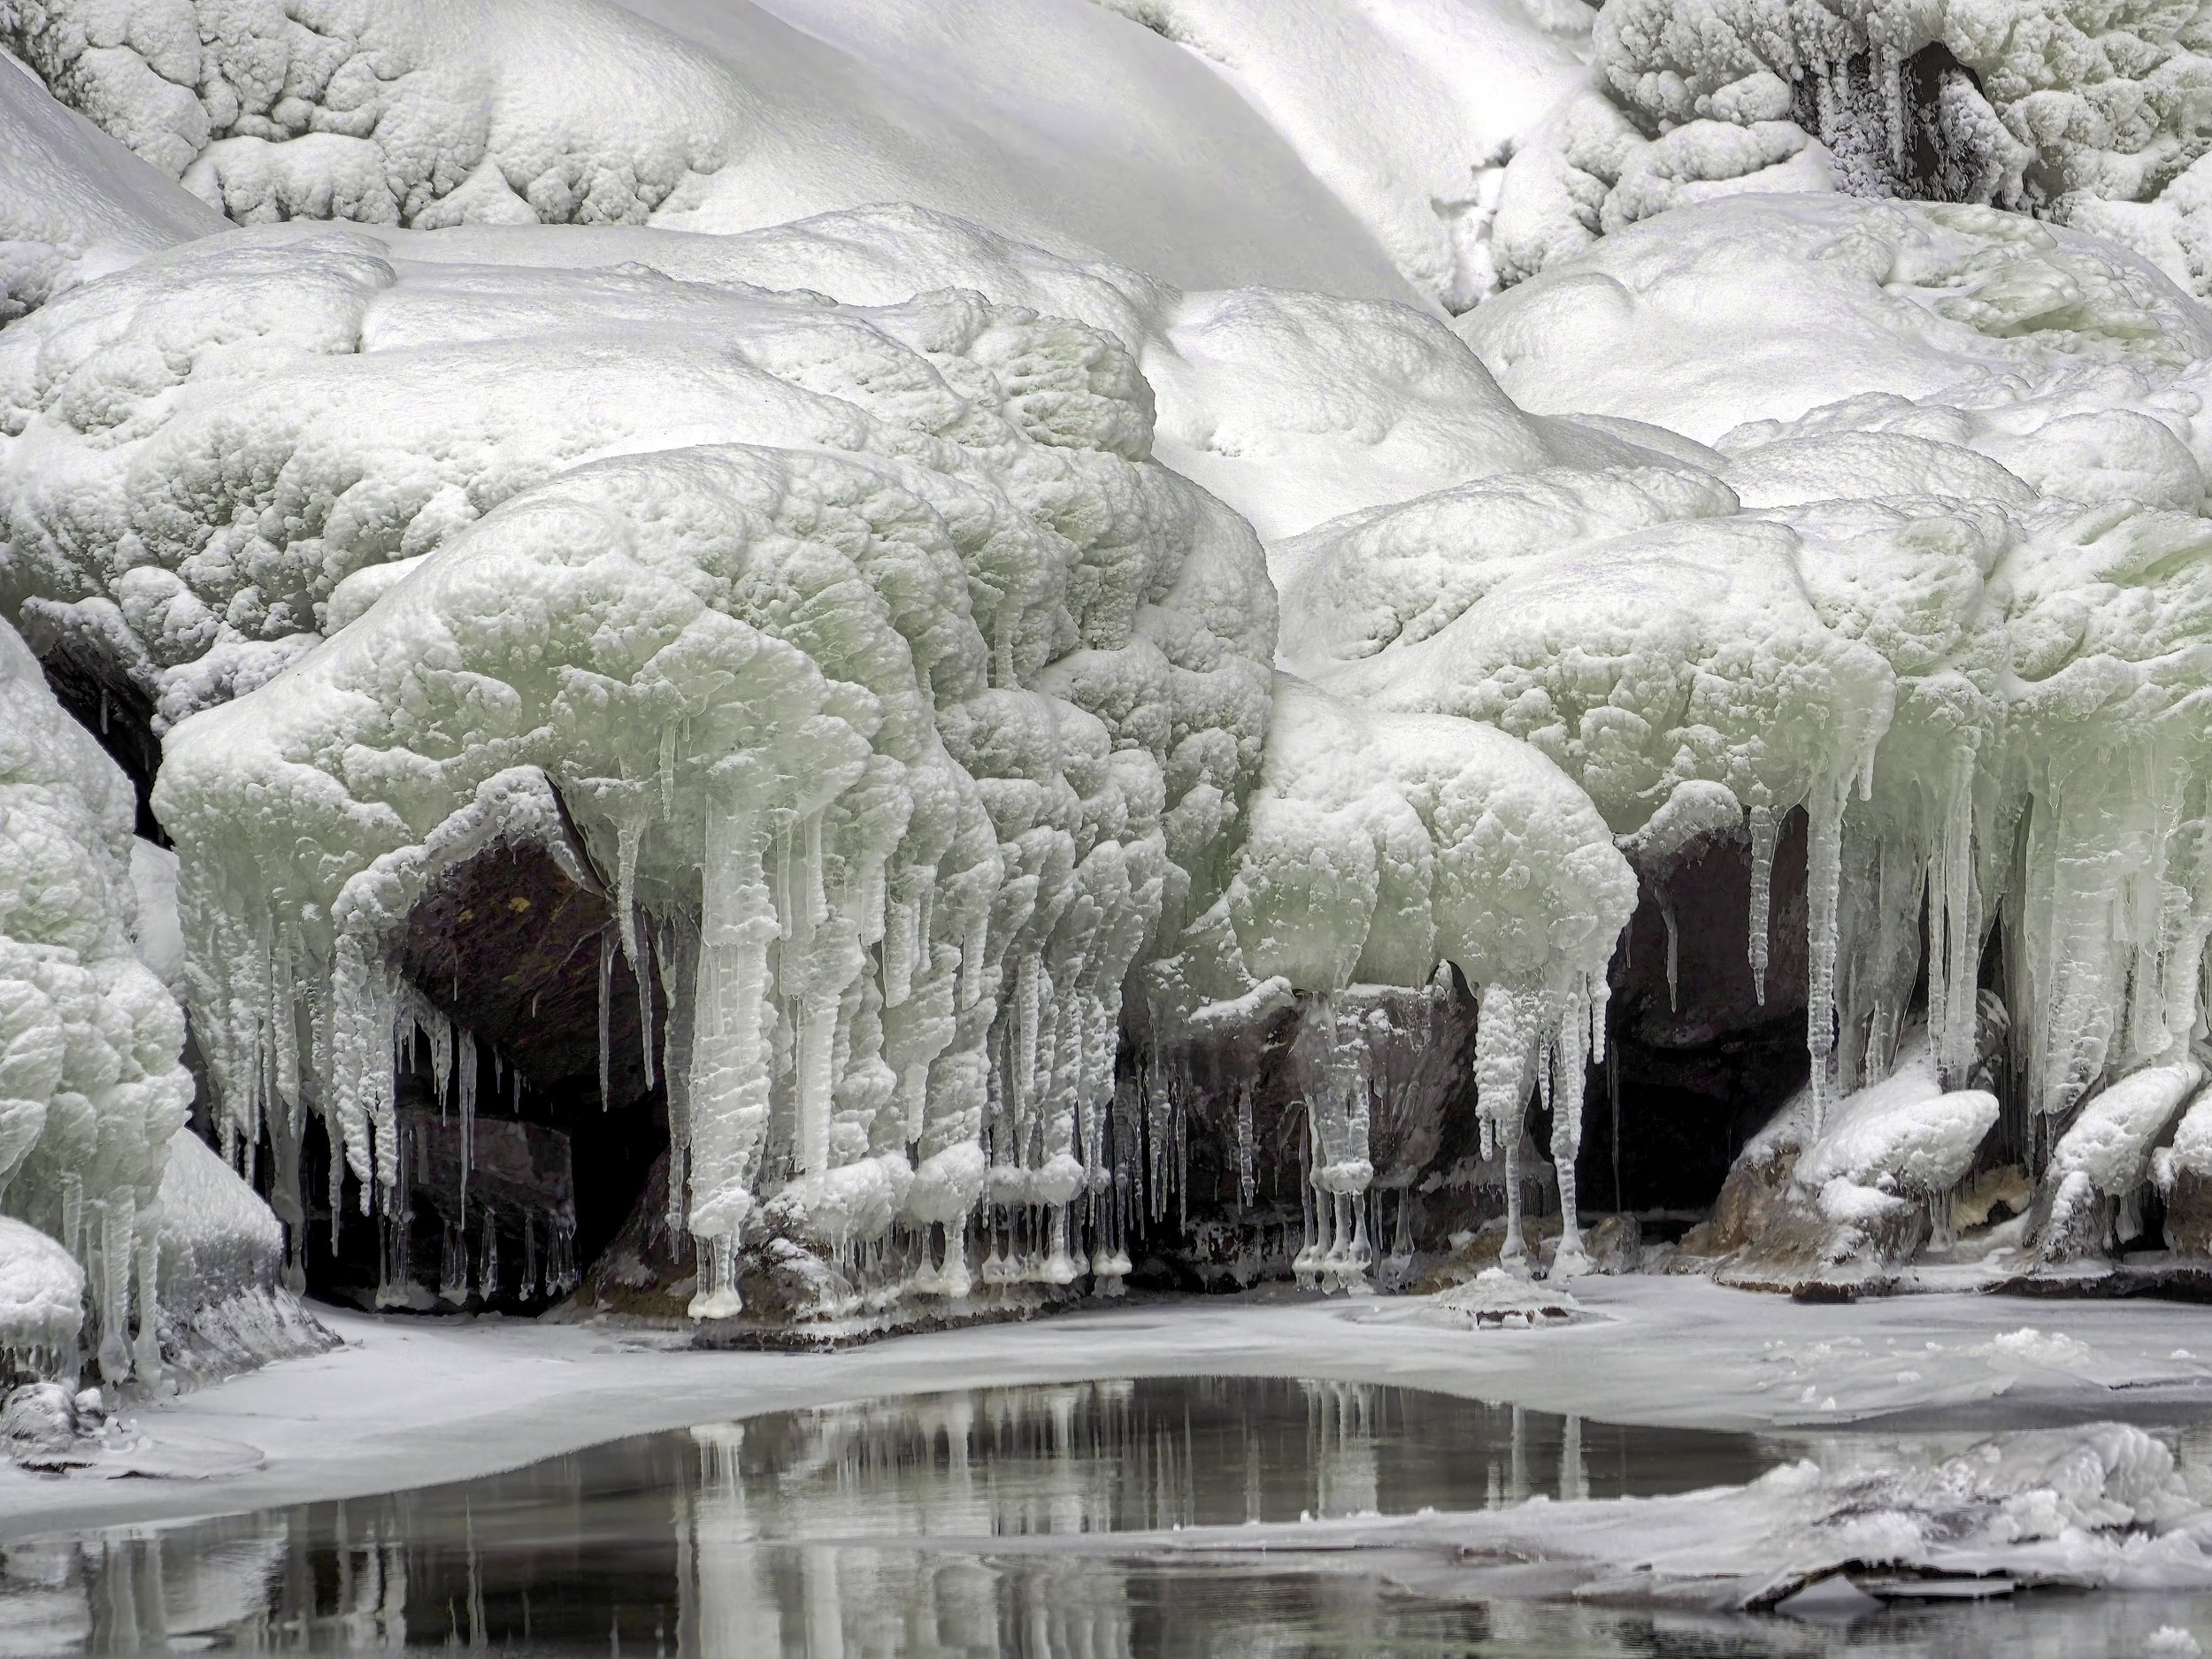  Bolton Falls on the Winooski River freezes in spectacular formations. Photo by Gordon Miller  